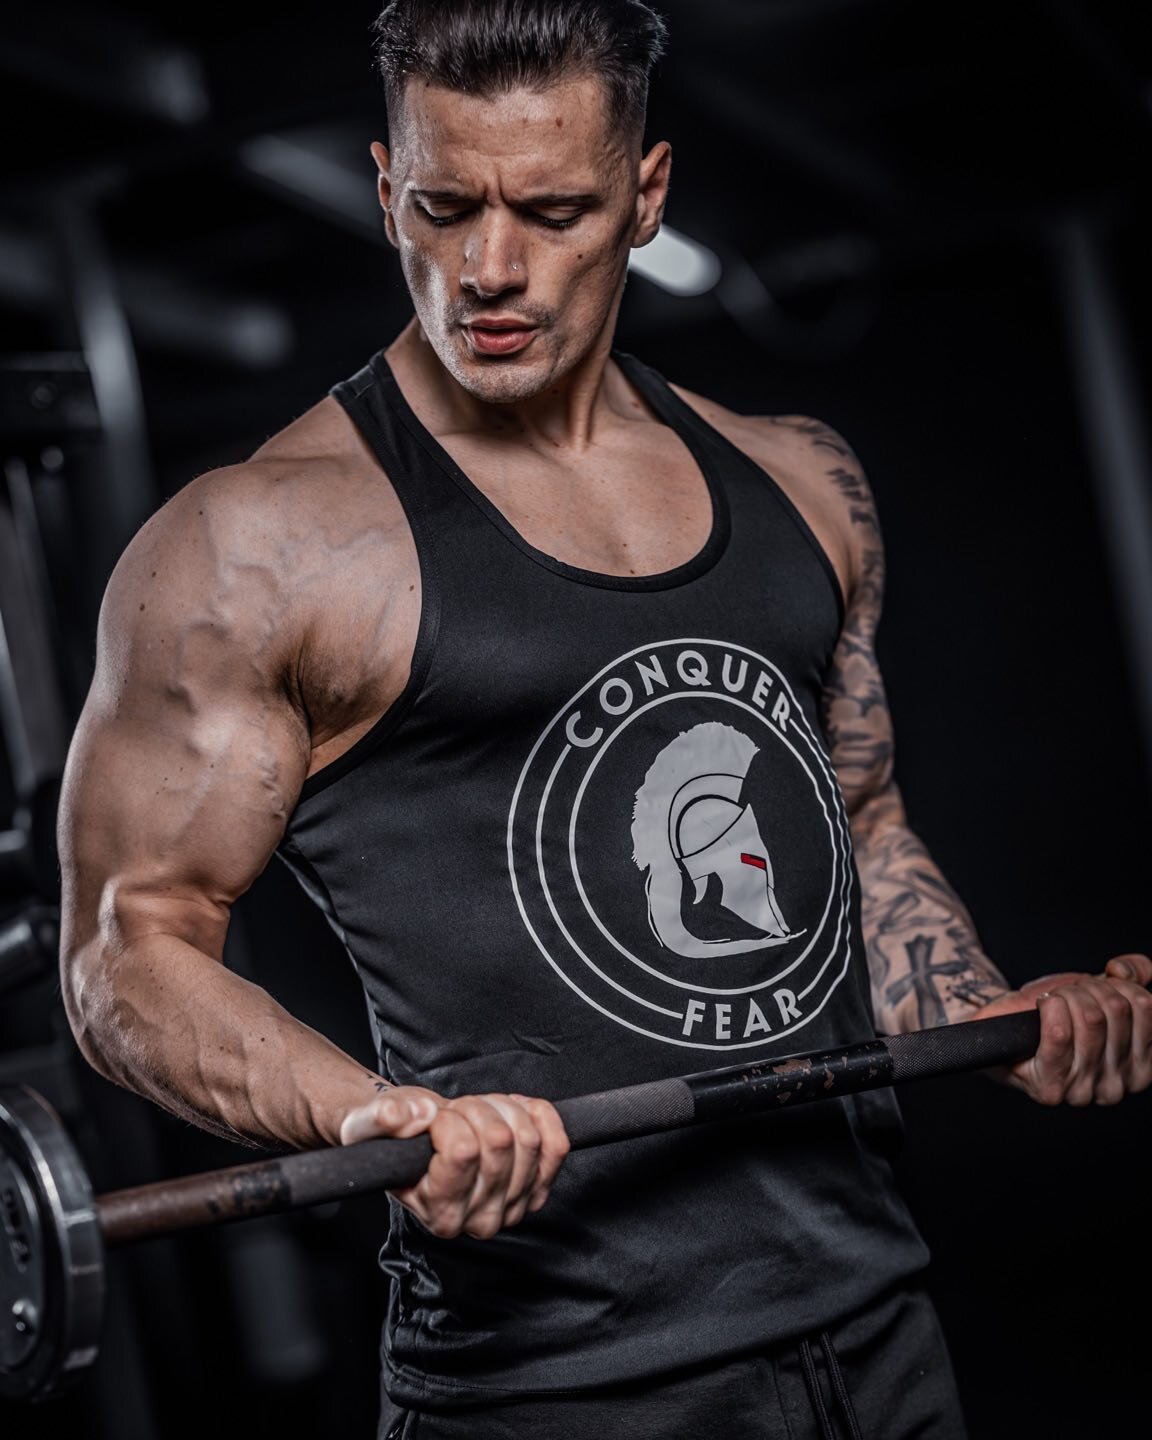 Biceps don&rsquo;t grown on tree get working.

#biceps-curls #fitness #gym #workout #fitness-motivation #bodybuilding #personal-trainer 
#gym-life #fitfam #strong #instafit 
#protein #fitUK #fitUSA #fitWorld 
#muscle #growth

@conquerfearclothing